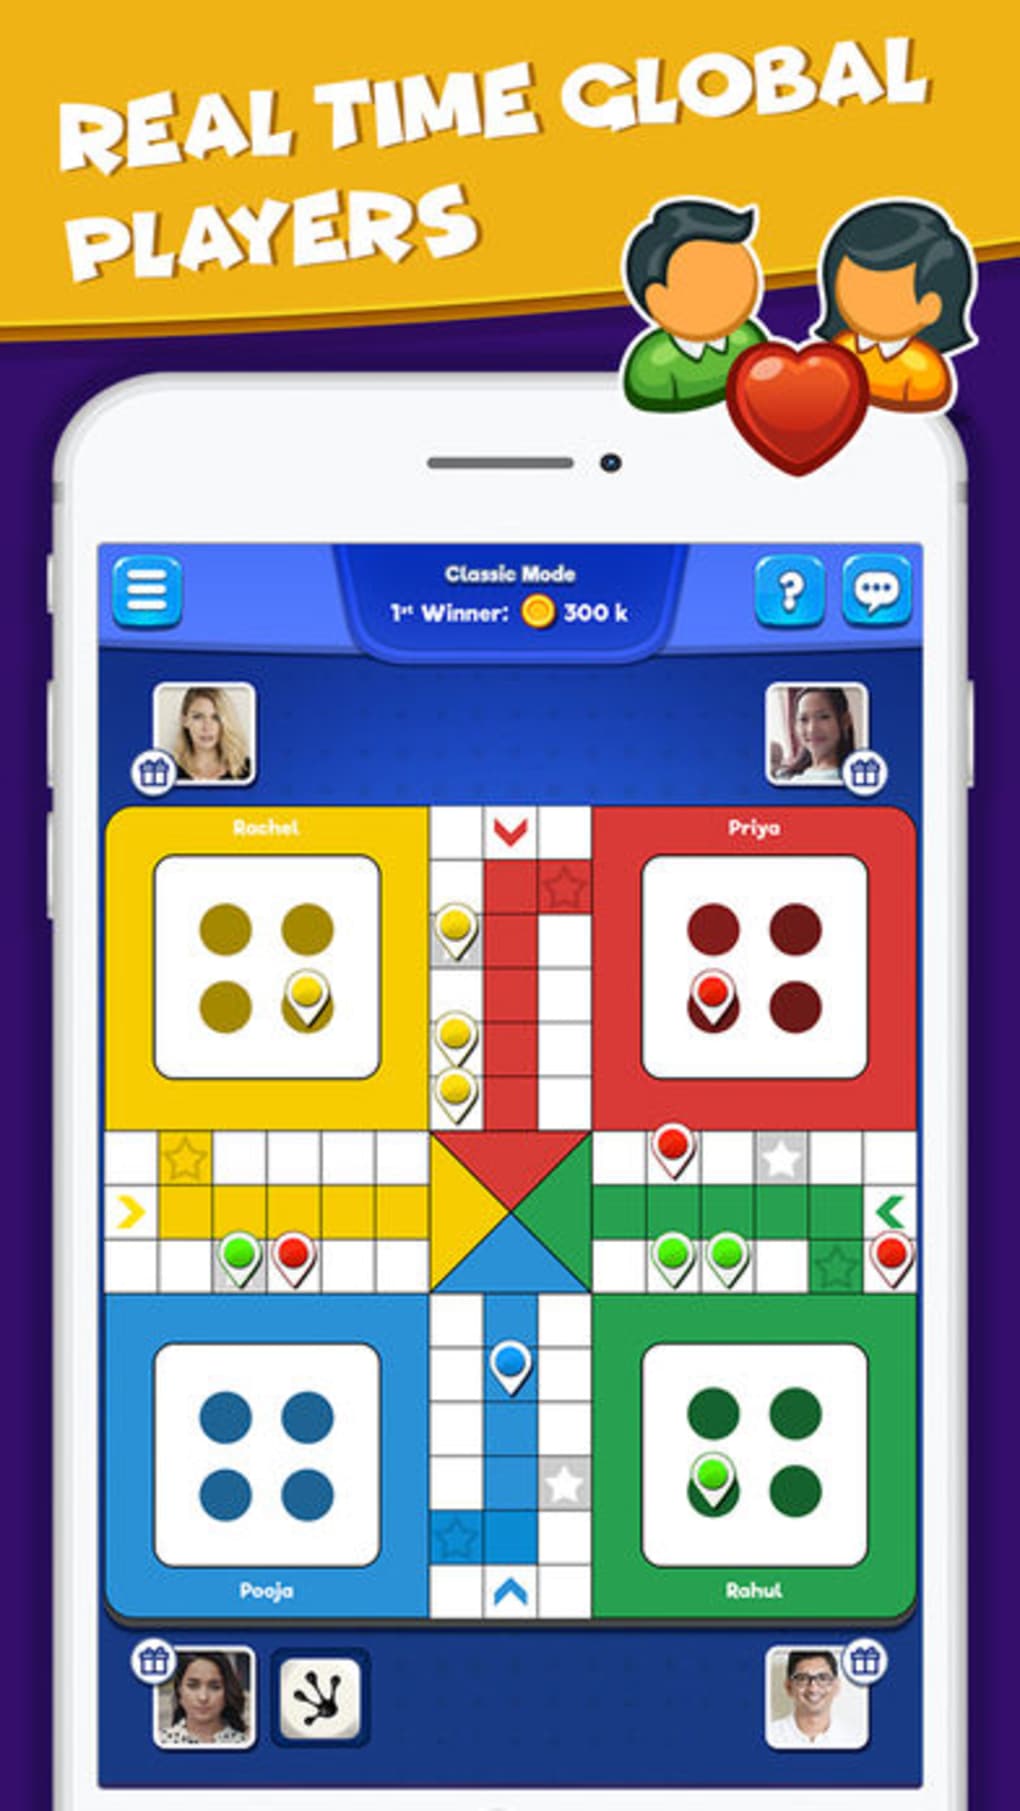 Ludo Club - Dice & Board Game for Android - Free App Download